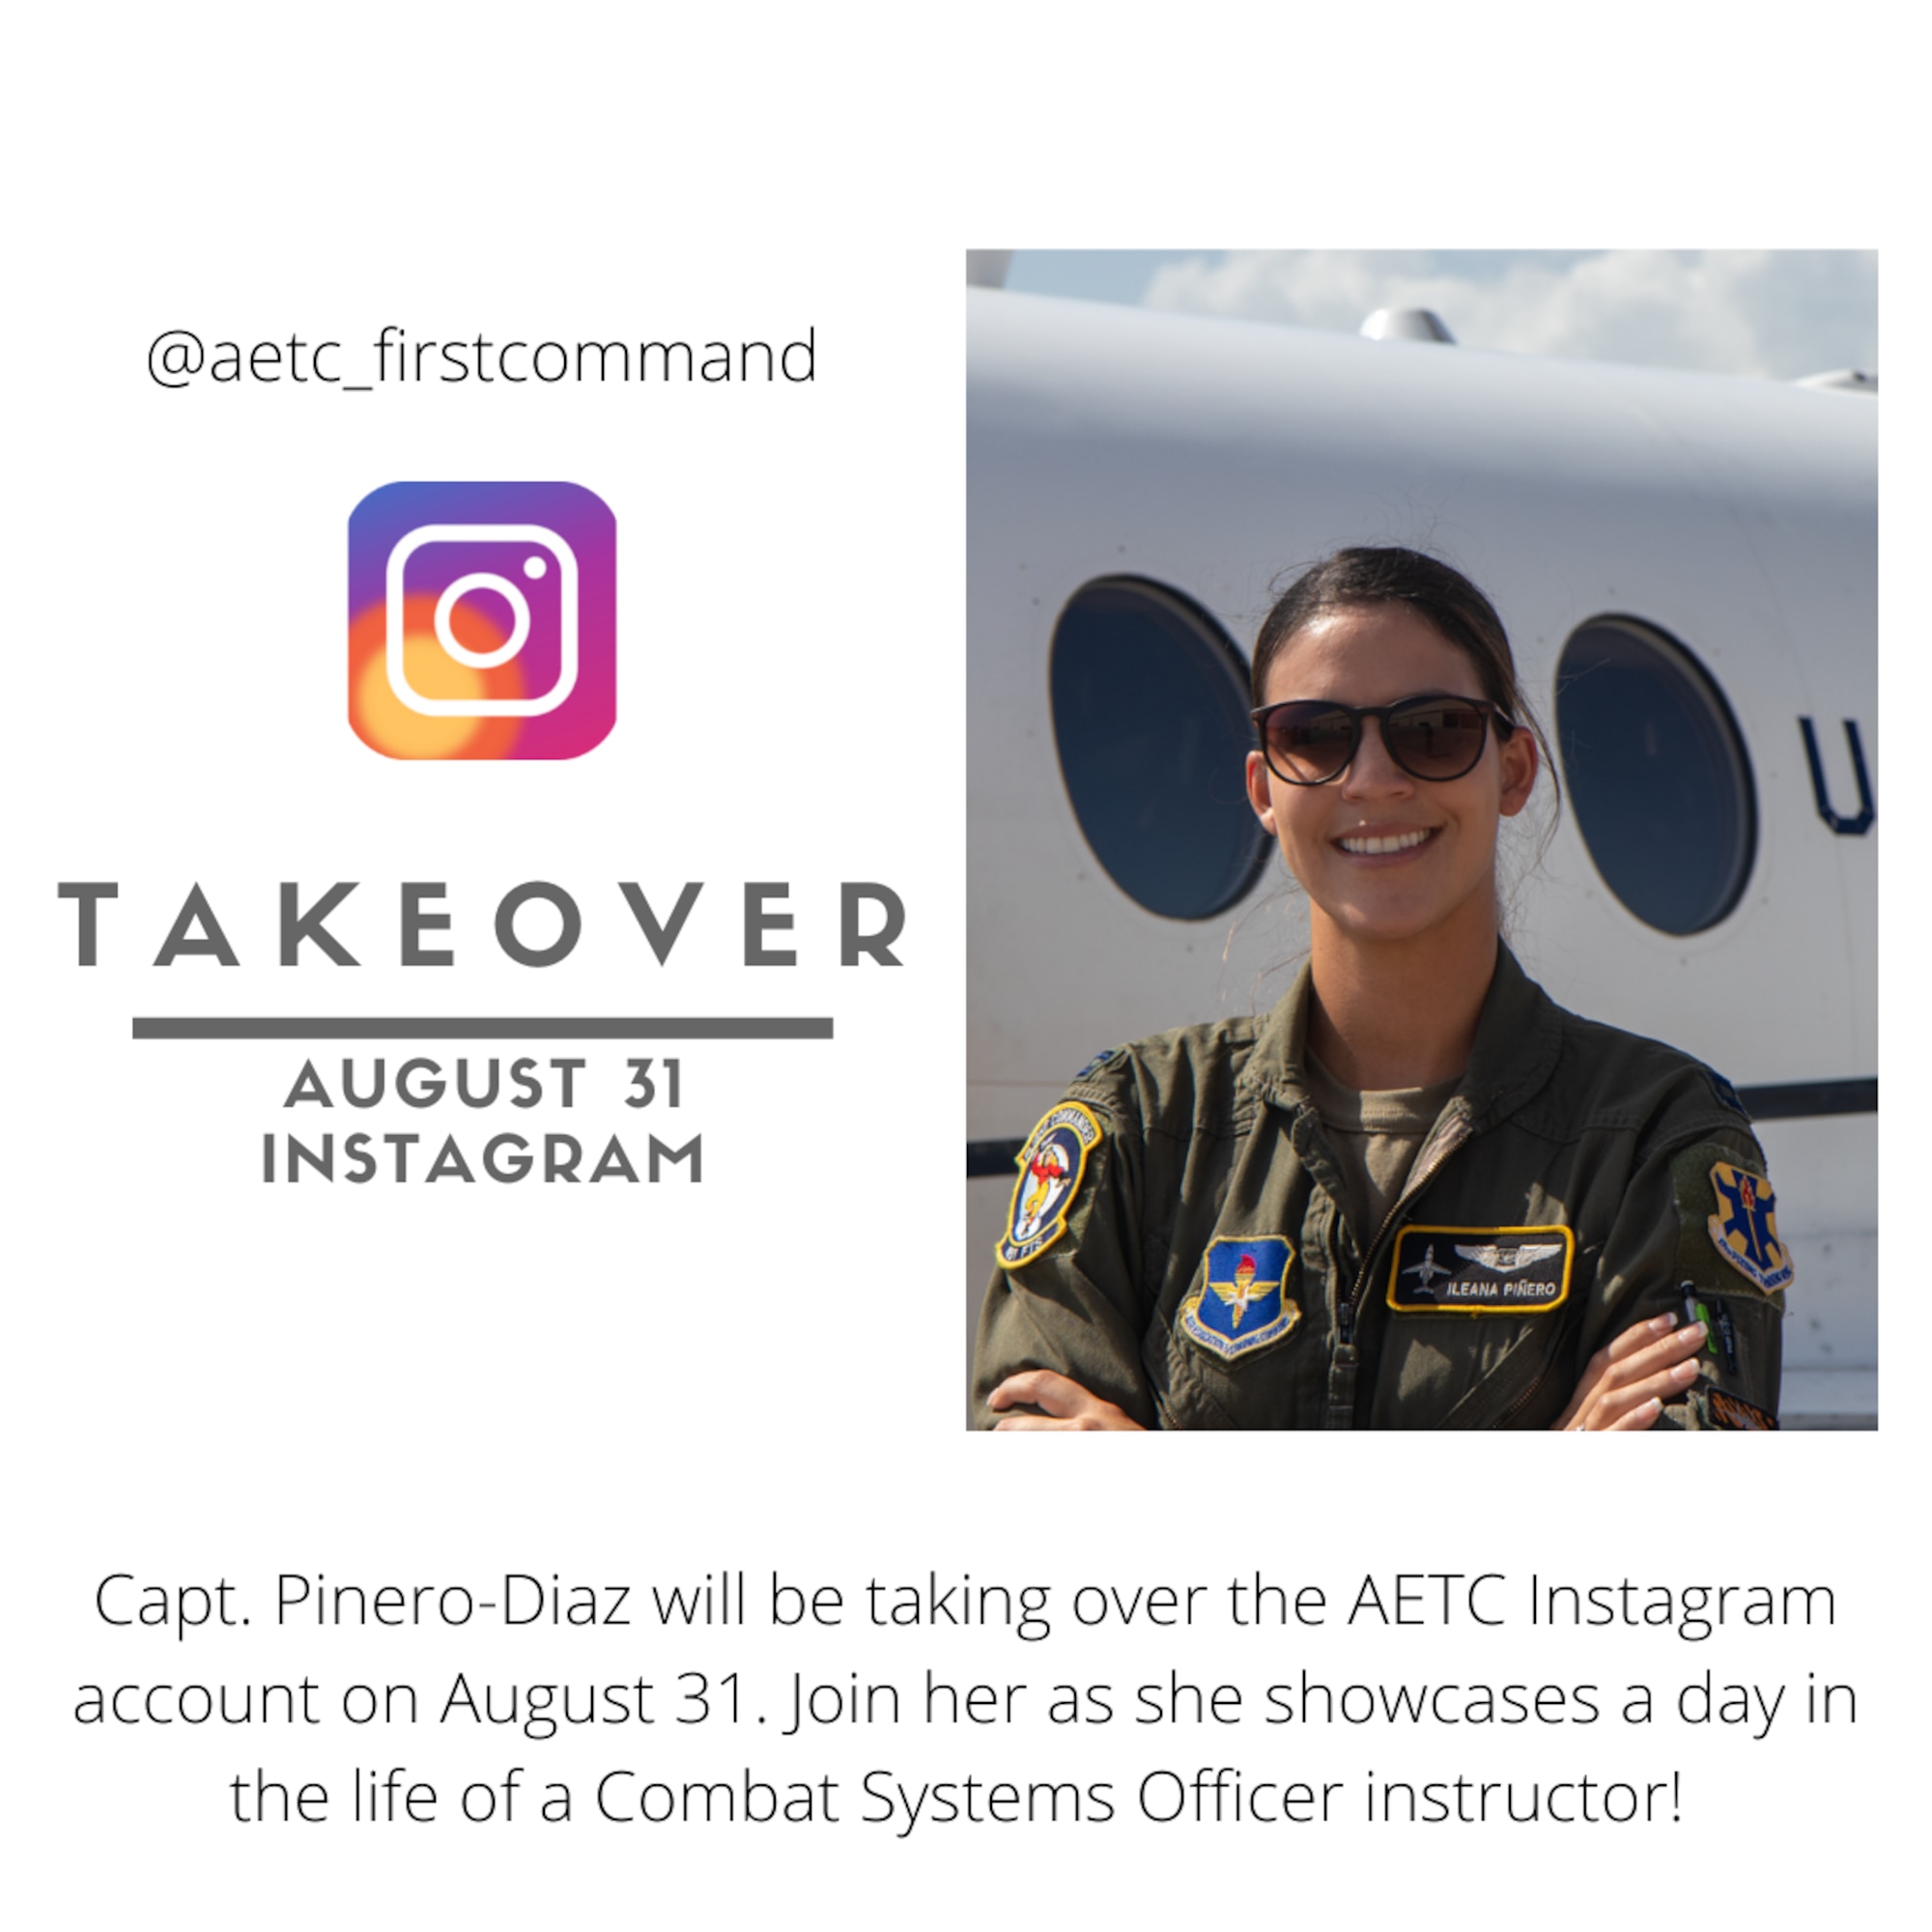 Graphic of Capt. Pinero-Diaz in front of airframe and instagram logo with the date for the AETC instagram takeover happening August 31, 2021